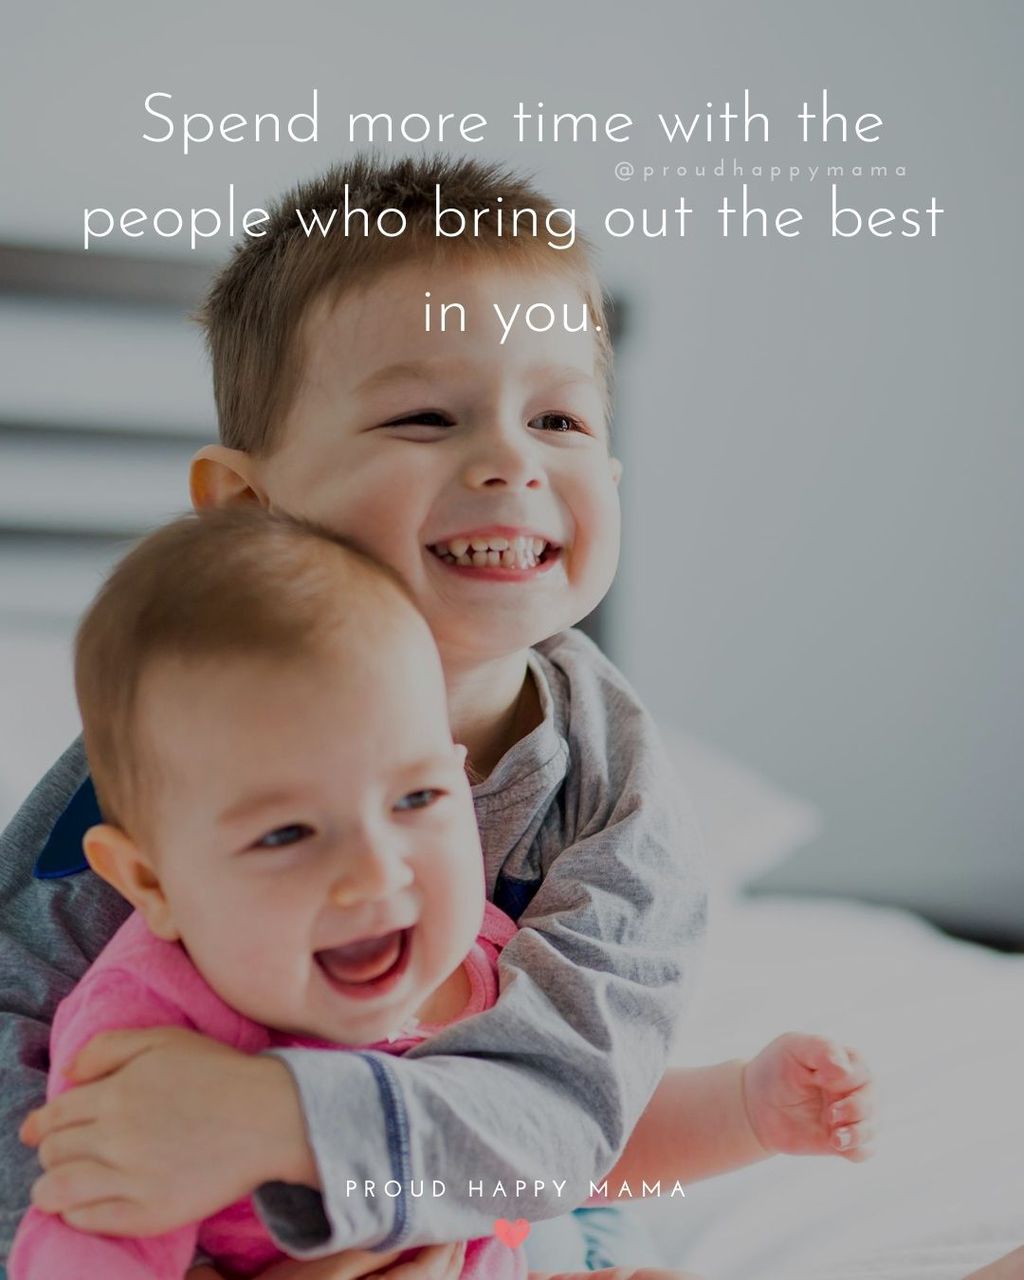 Family And Friends Quotes | Spend more time with the people who bring out the best in you.